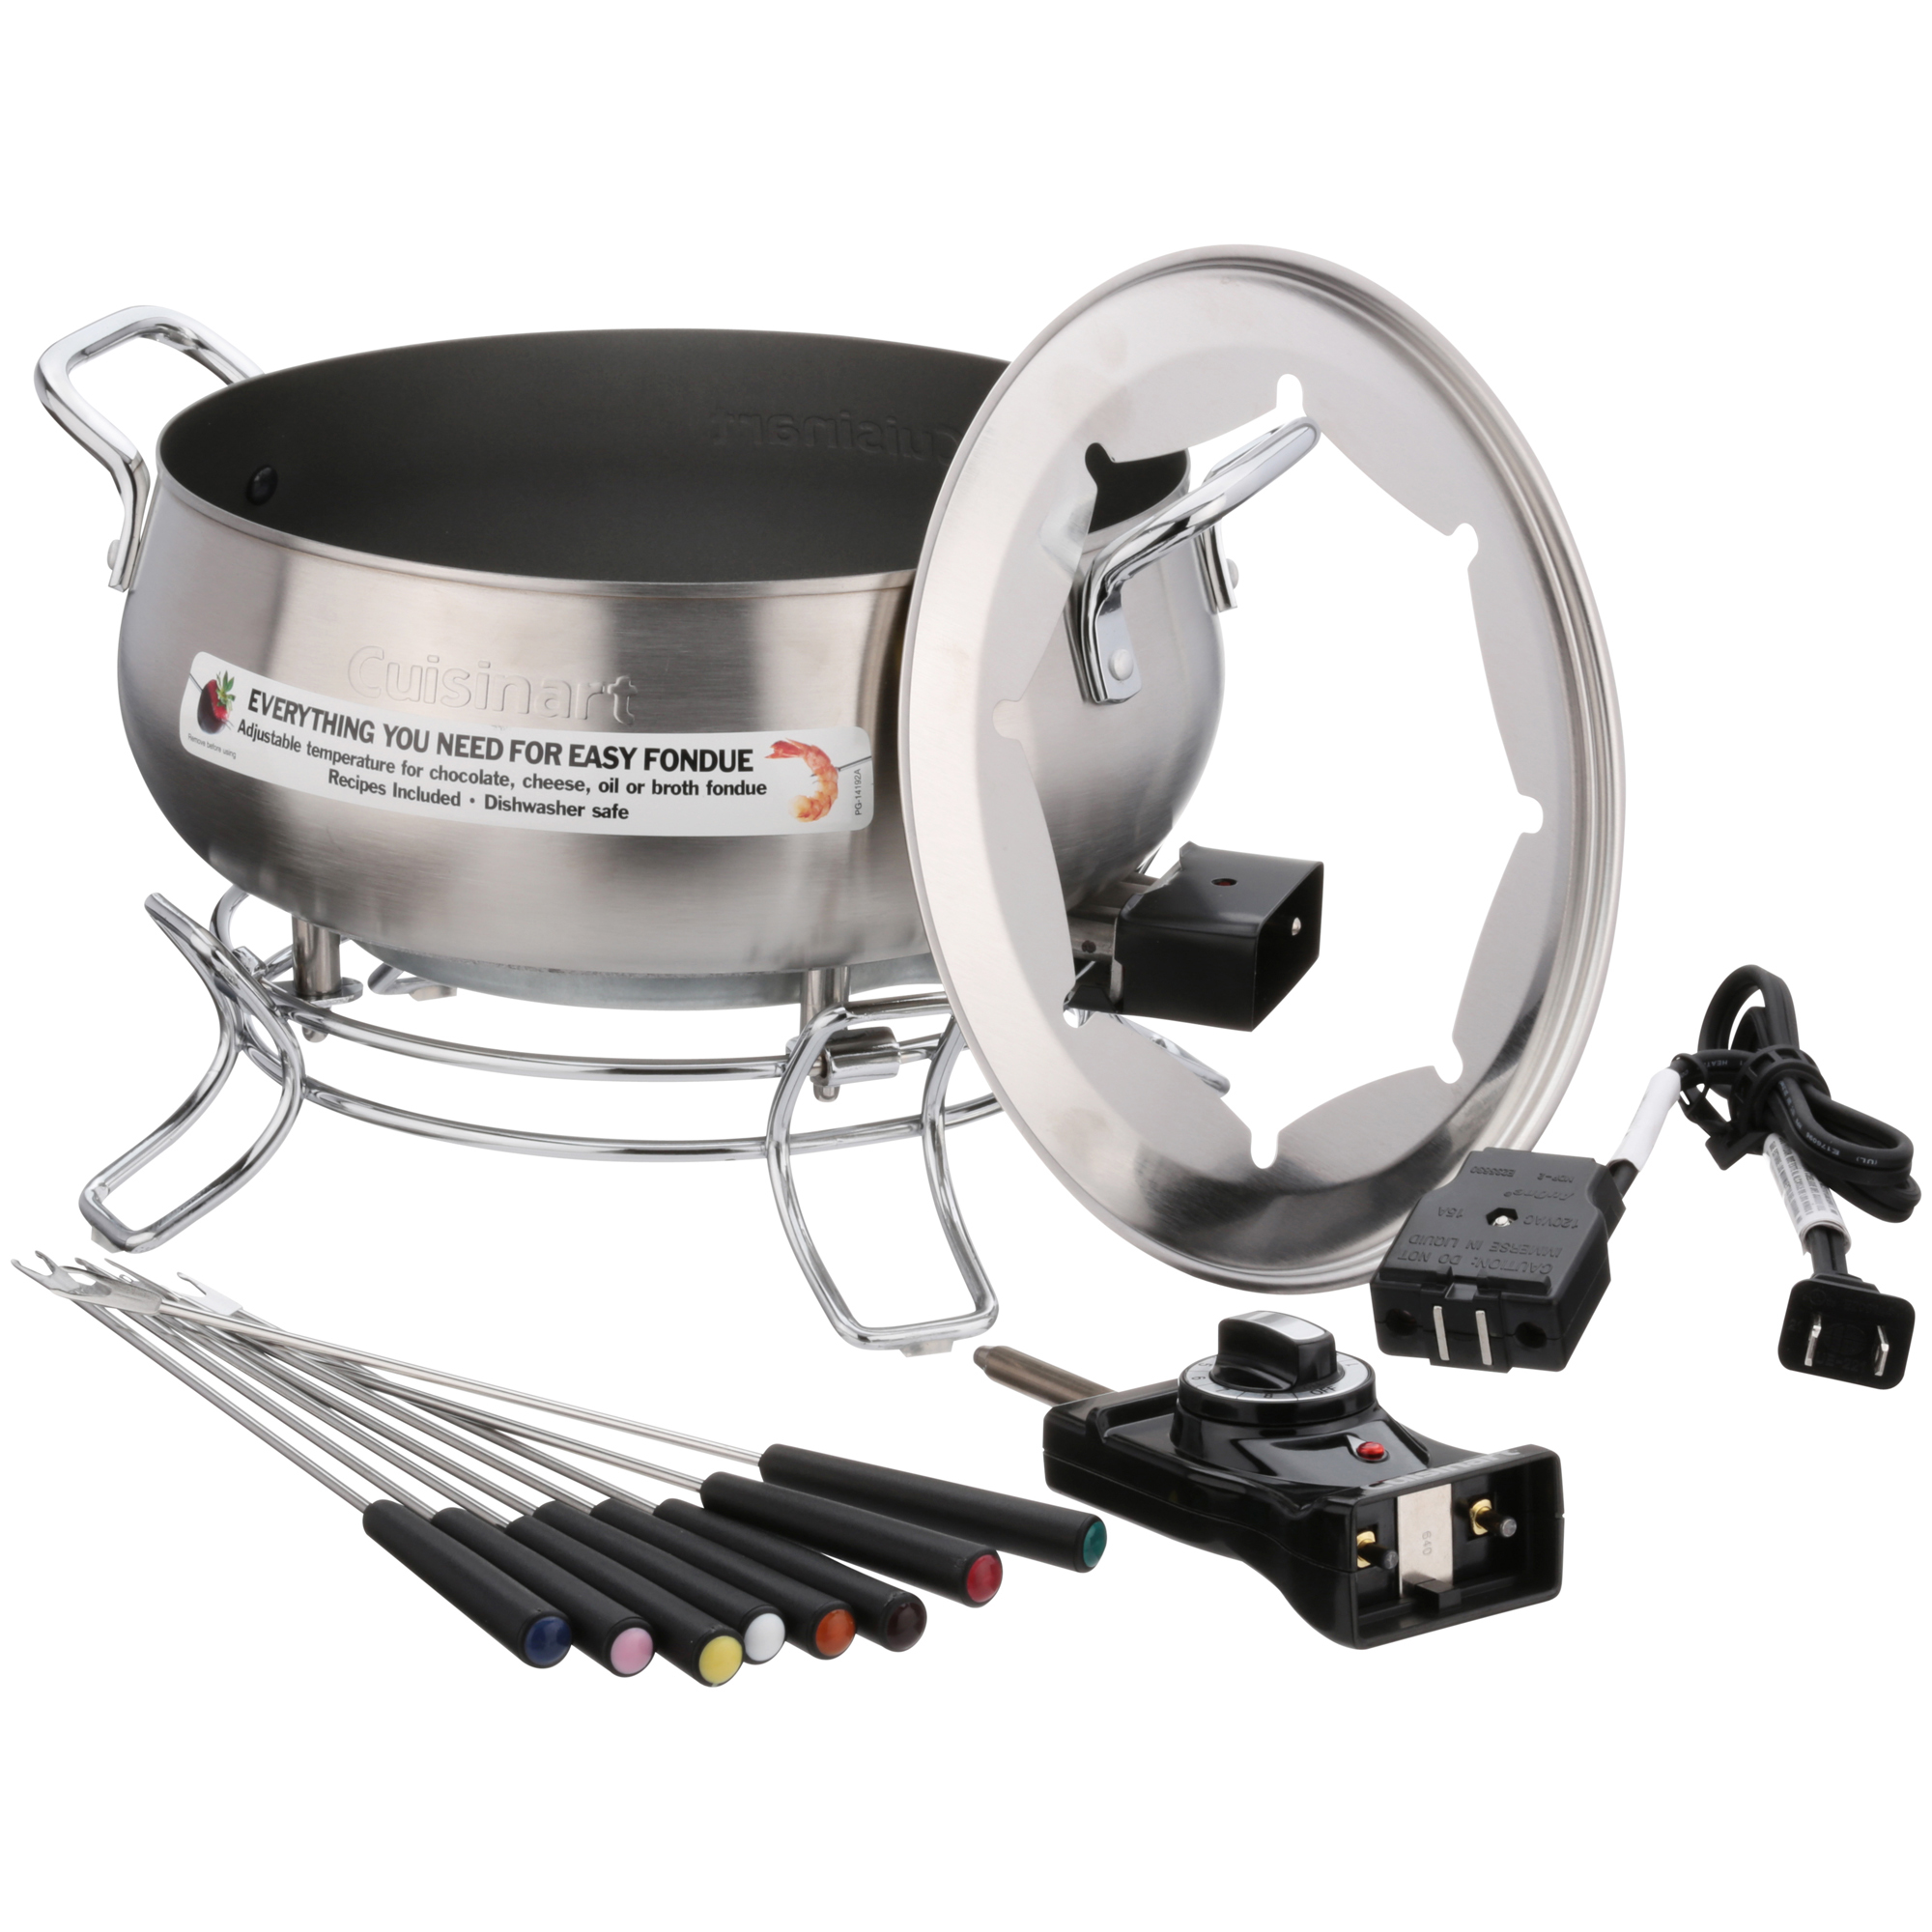 Cuisinart CFO-3SS, 3-Quart Electric Fondue Pot with Forks, Stainless Steel - image 3 of 6